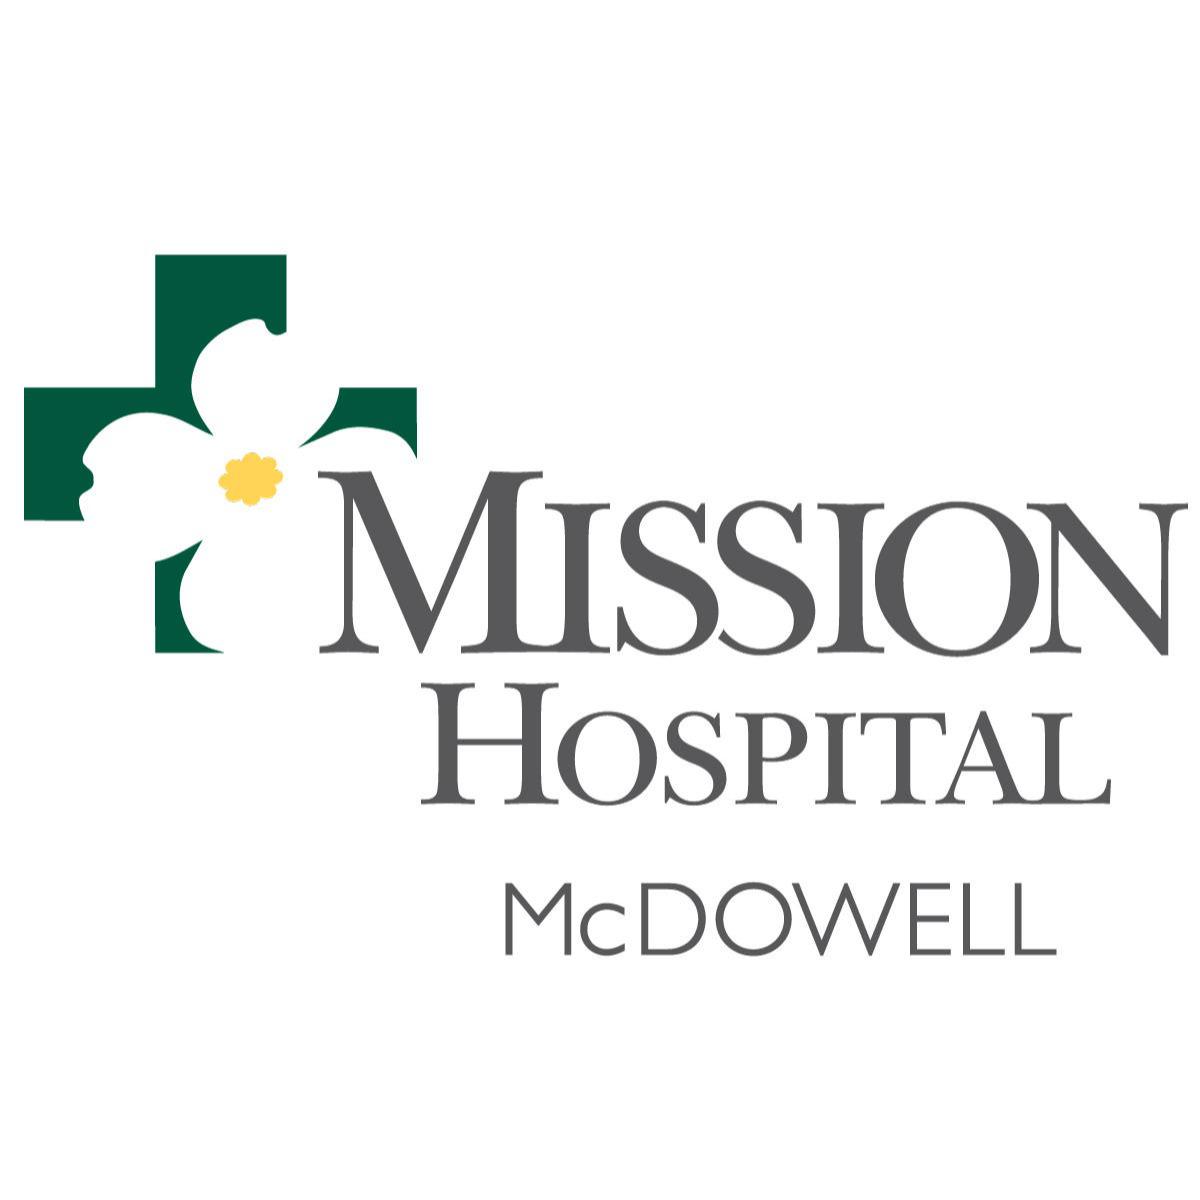 Mission Hospital McDowell Outpatient Rehab Services - Marion, NC 28752 - (828)655-2555 | ShowMeLocal.com